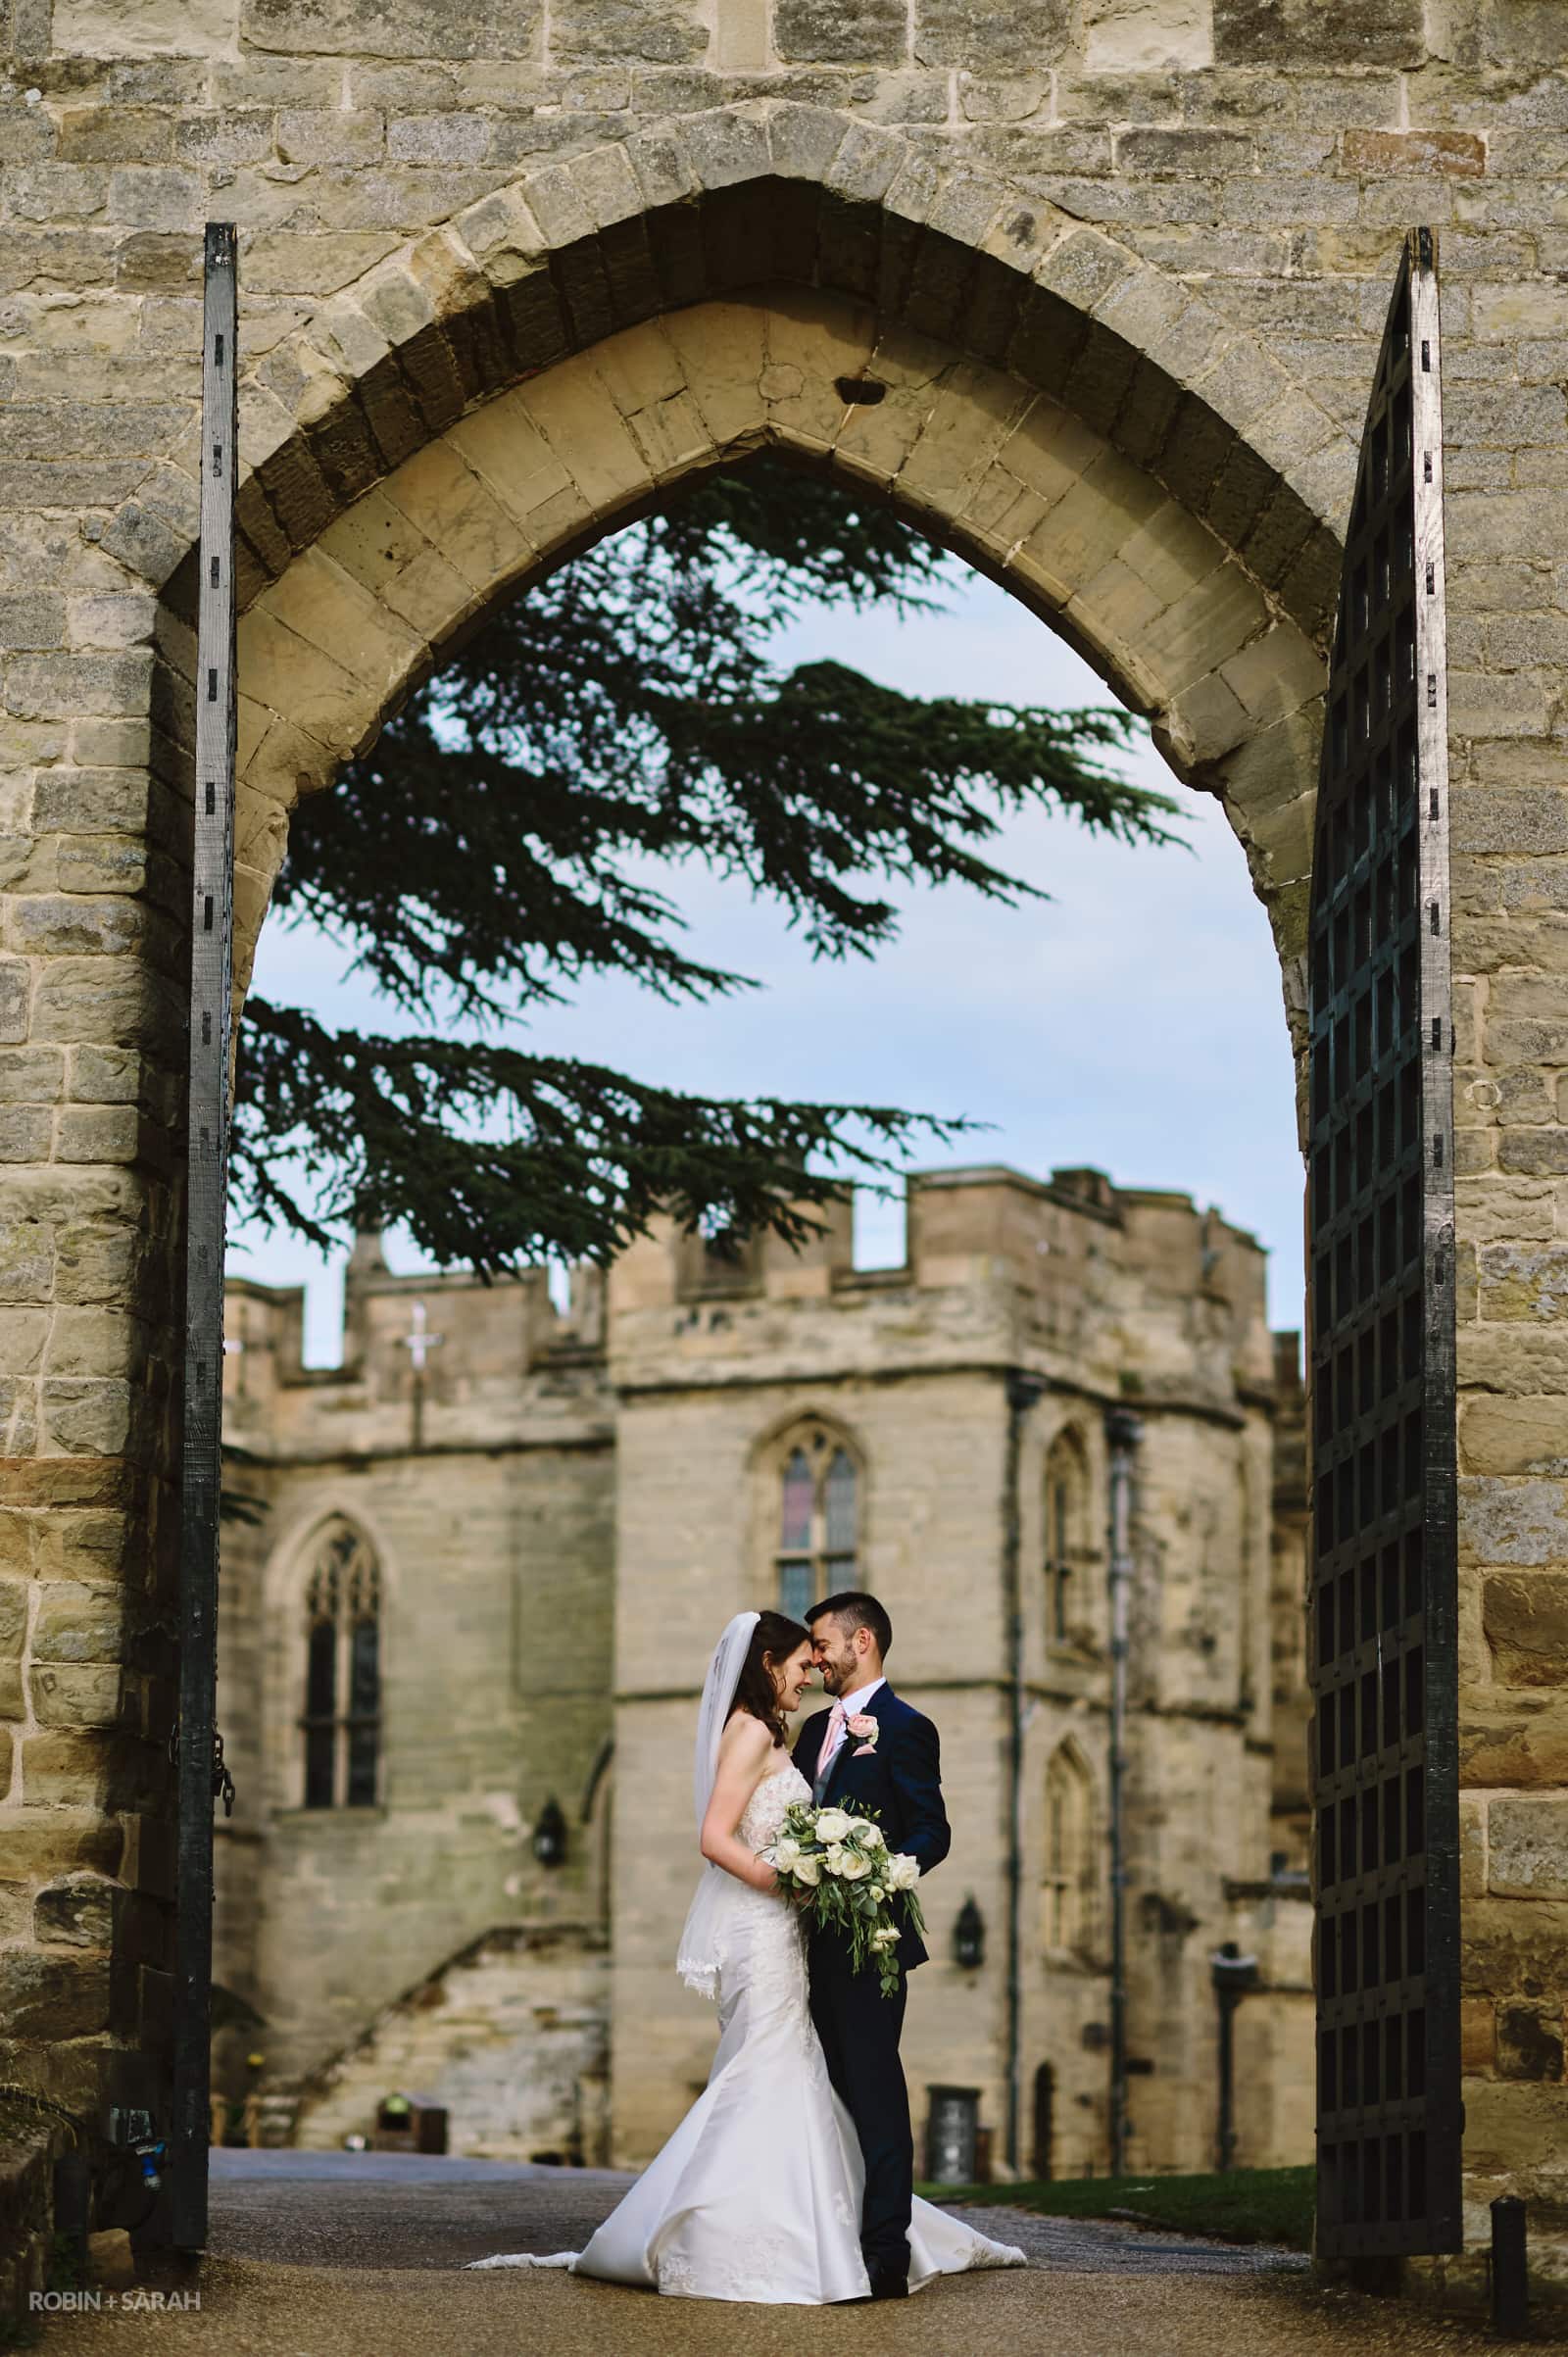 Newly married couple under large stone arch at Warwick Castle